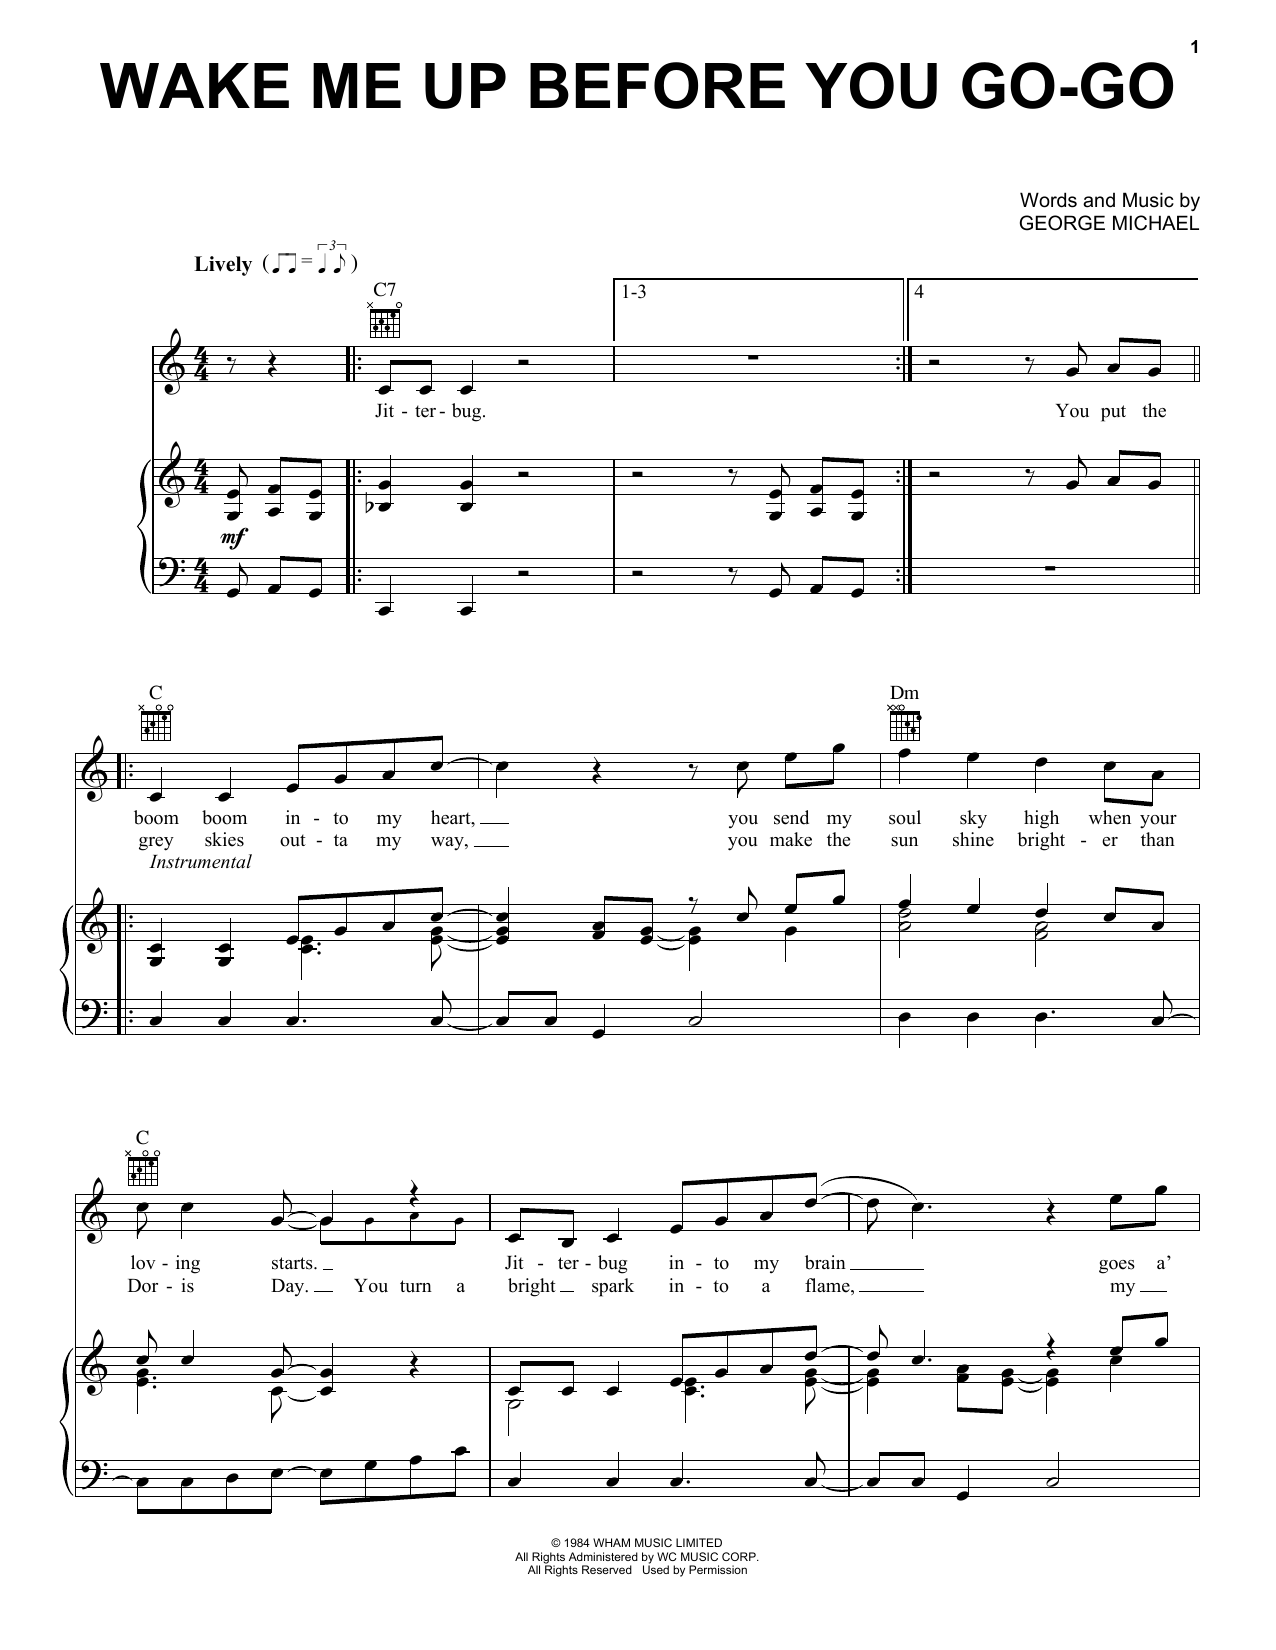 Download Wham! Wake Me Up Before You Go-Go Sheet Music